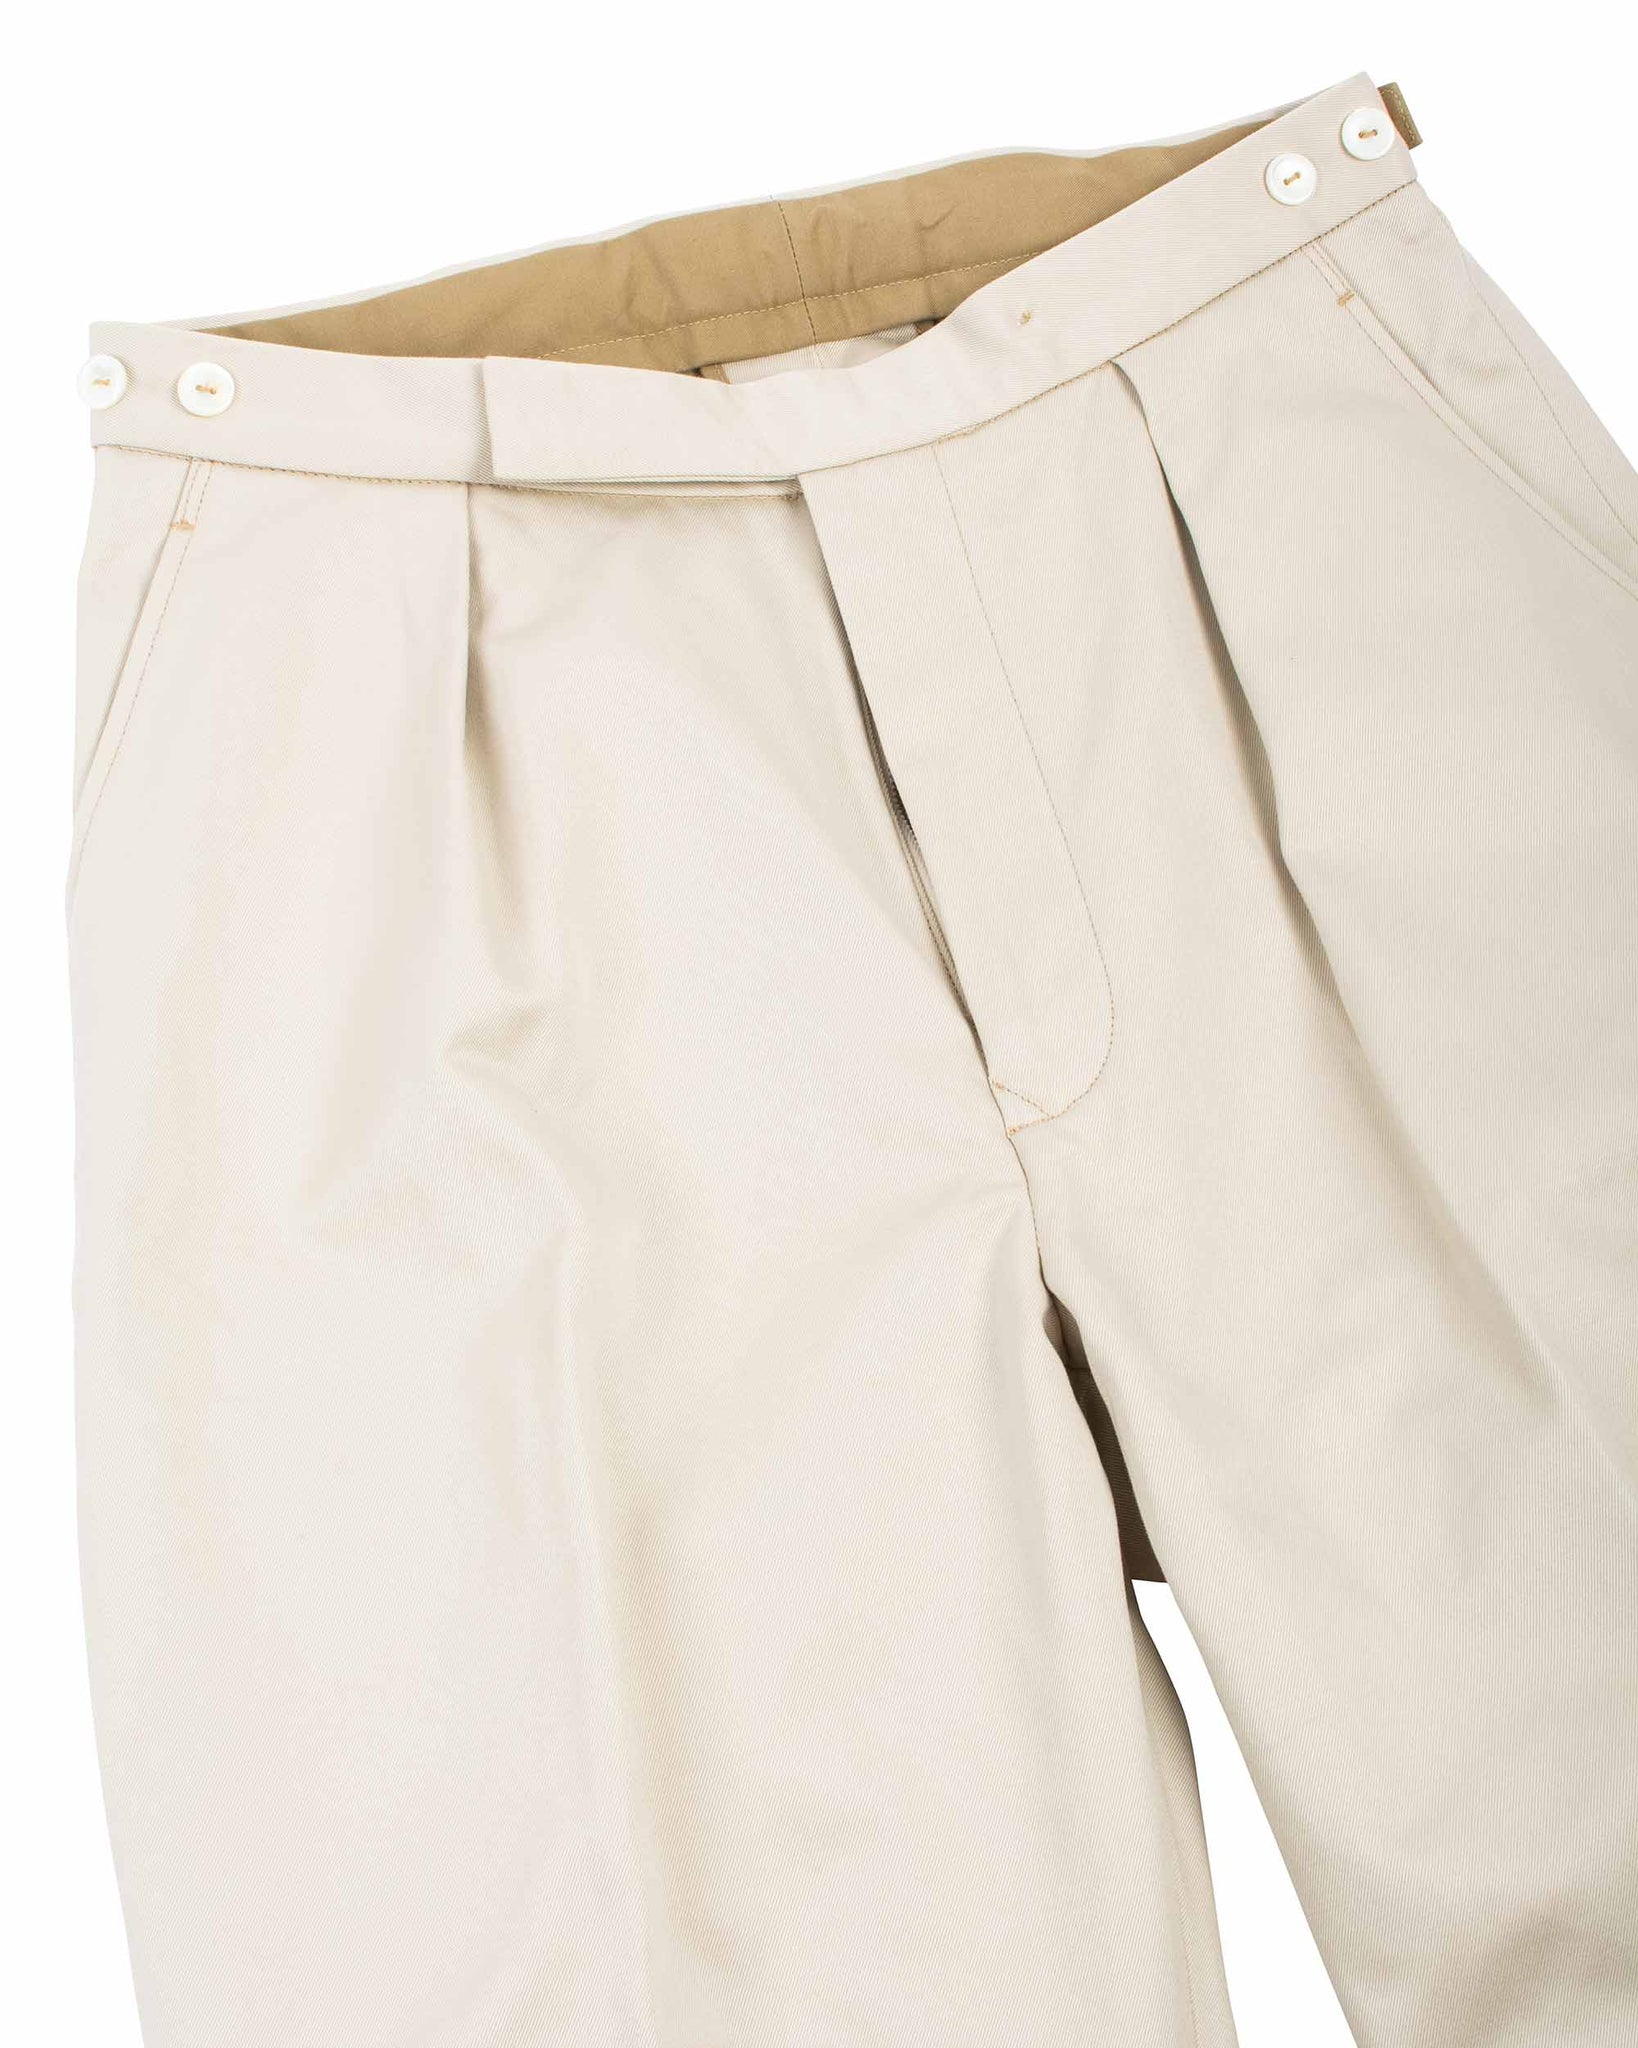 The Real McCoy's MP22018 1950s Cotton Chino Trousers / Beige Details